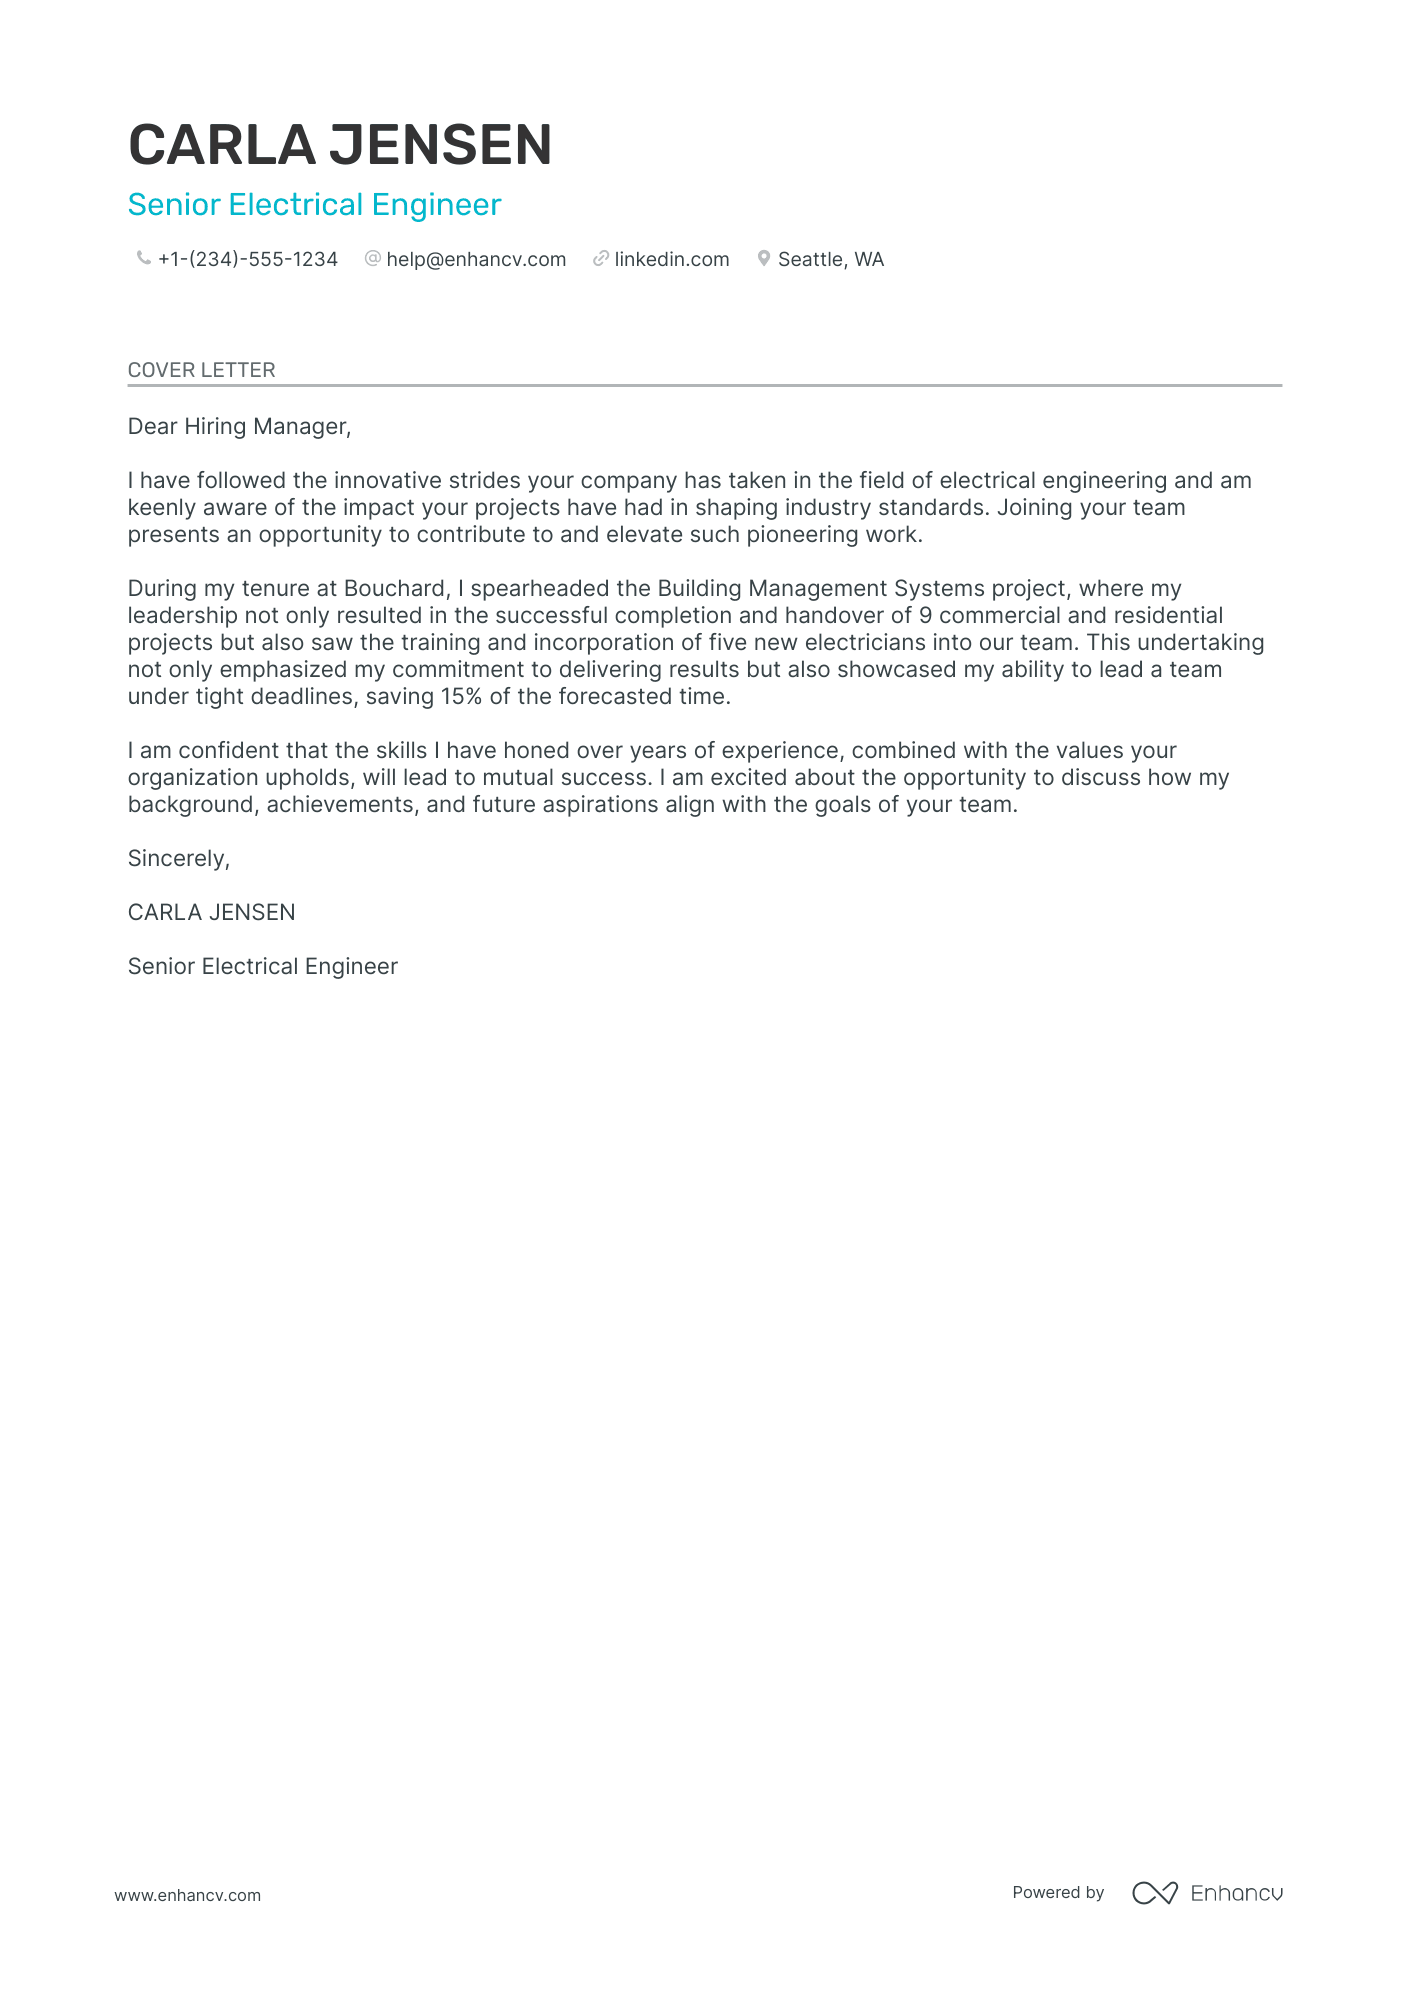 Electrical Engineering cover letter